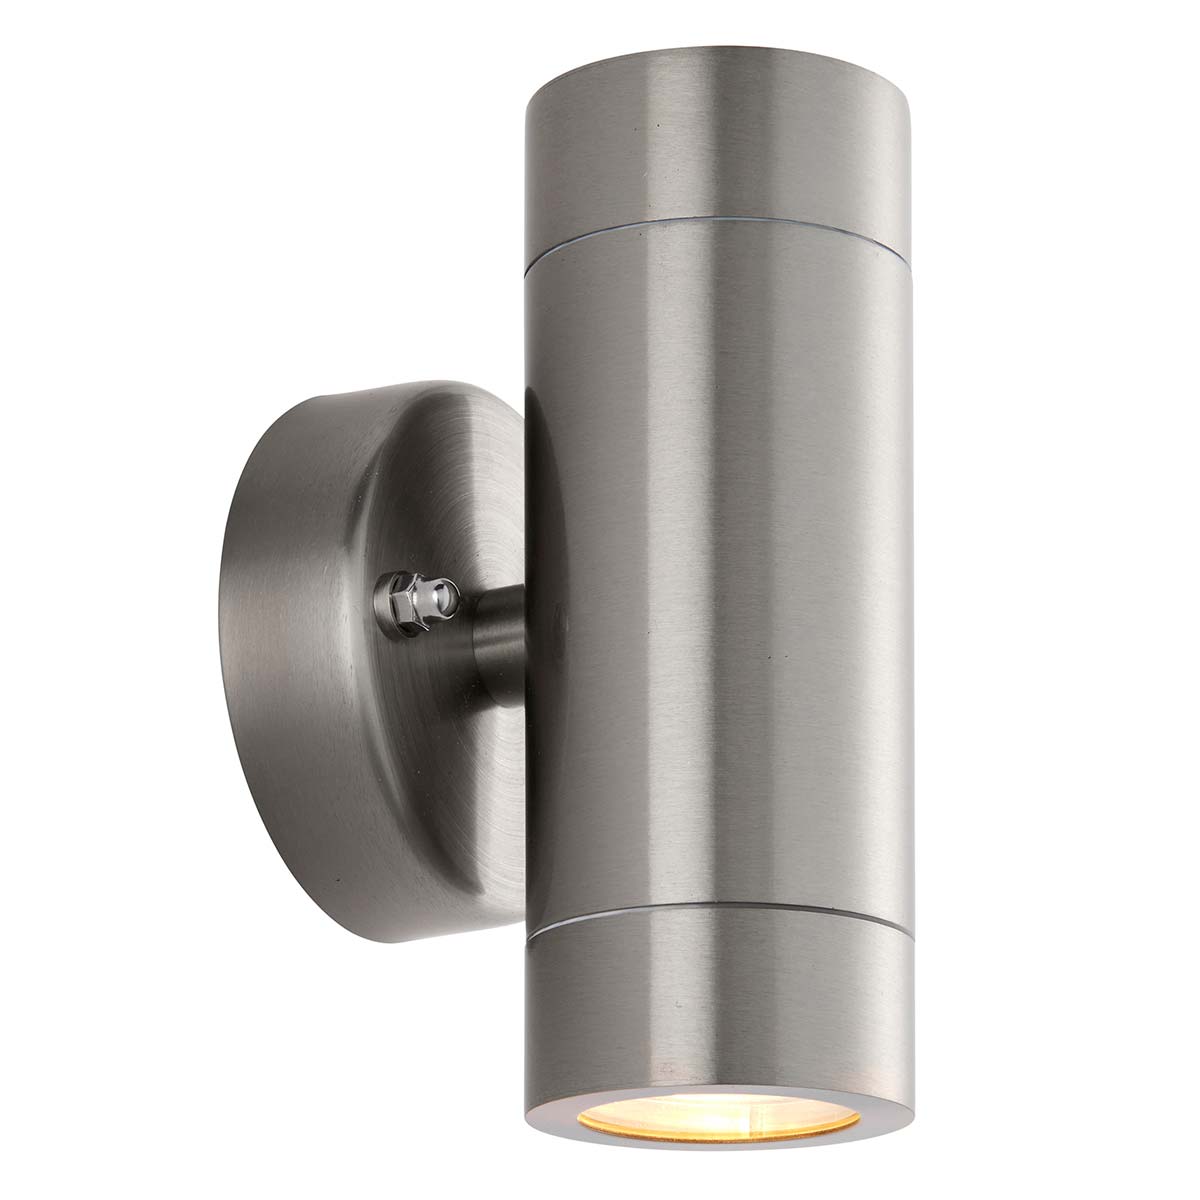 Palin 316 Stainless Steel Outdoor Up and Down Wall Spot Light